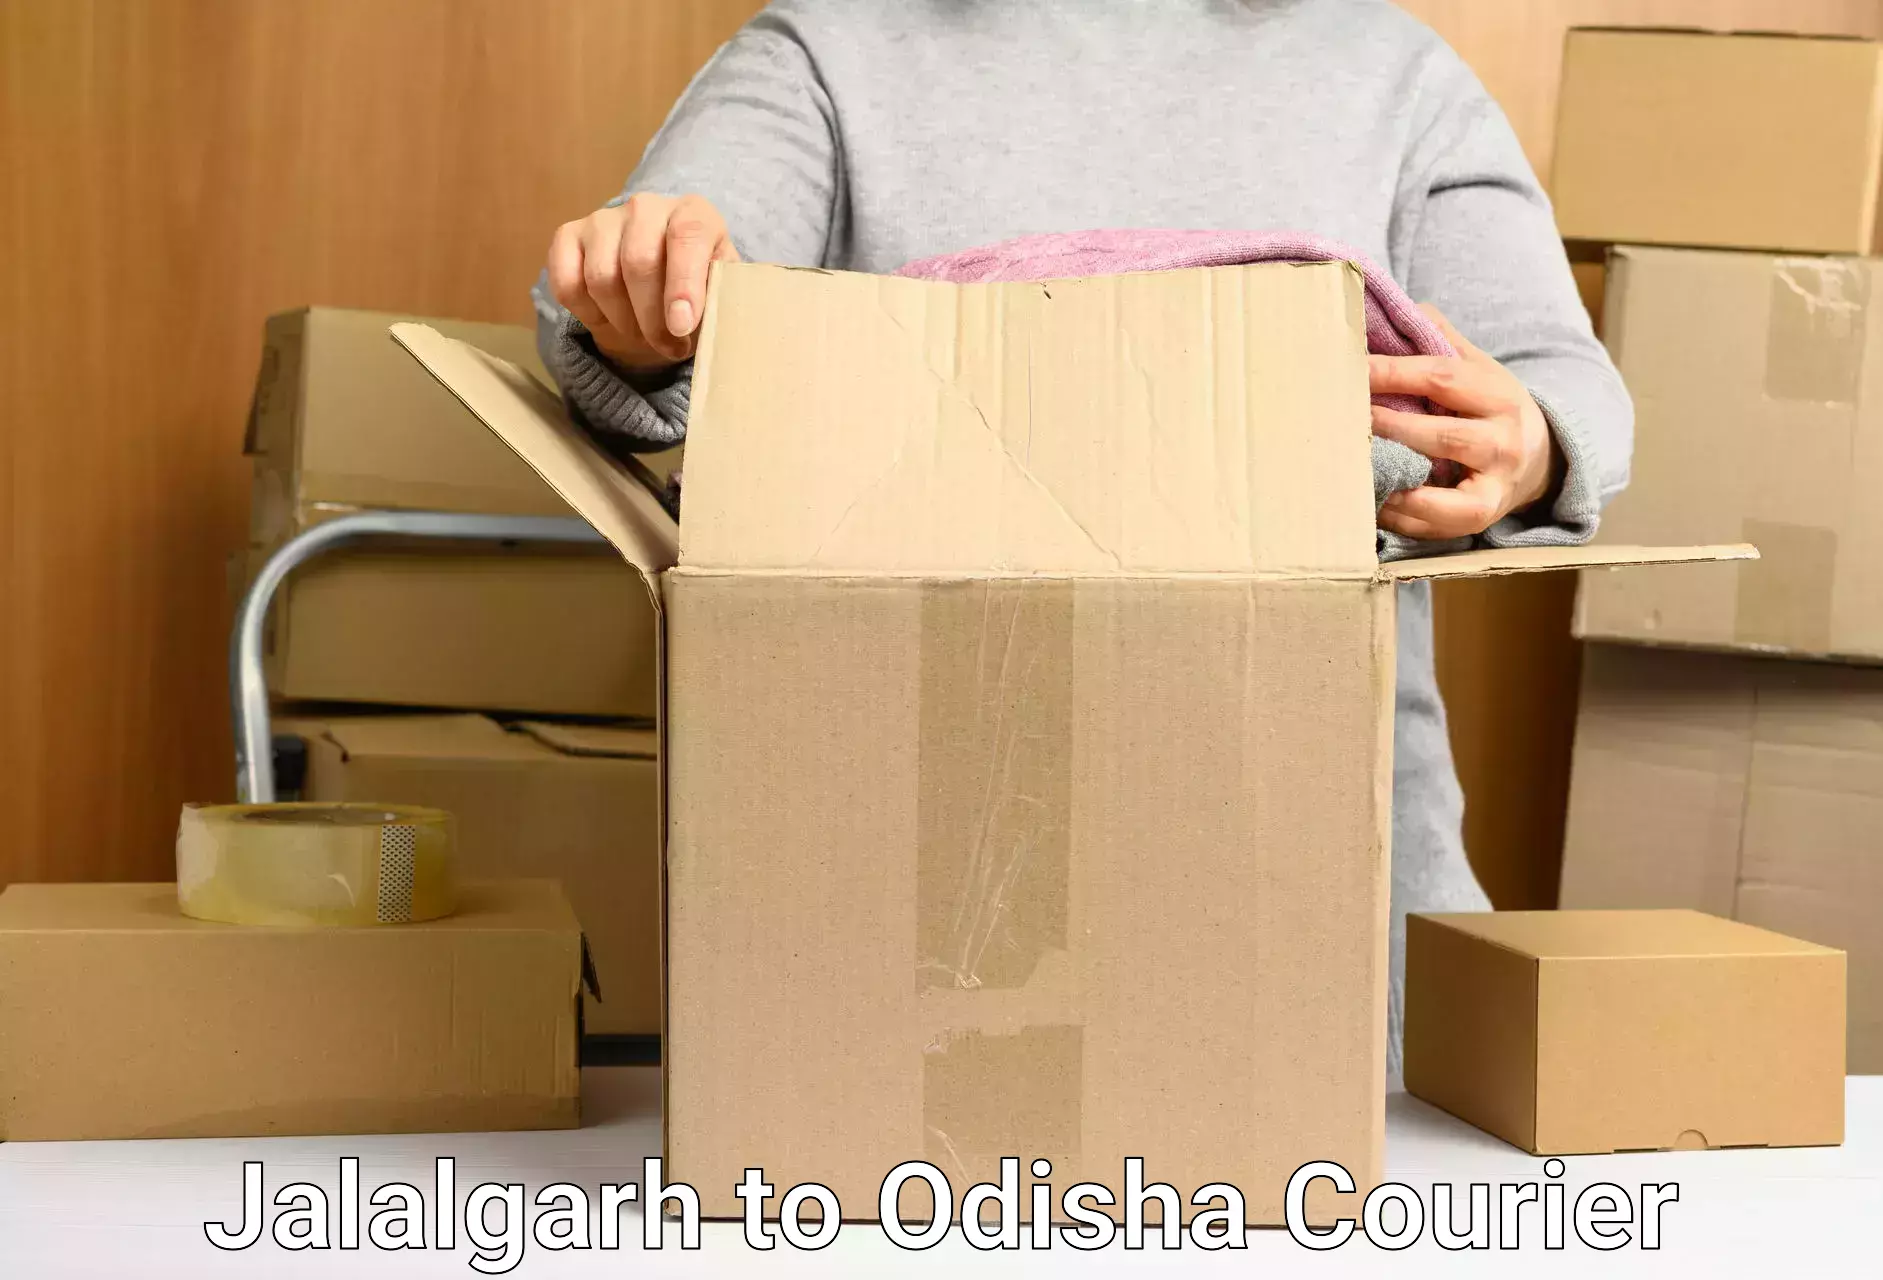 Courier rate comparison Jalalgarh to Cuttack